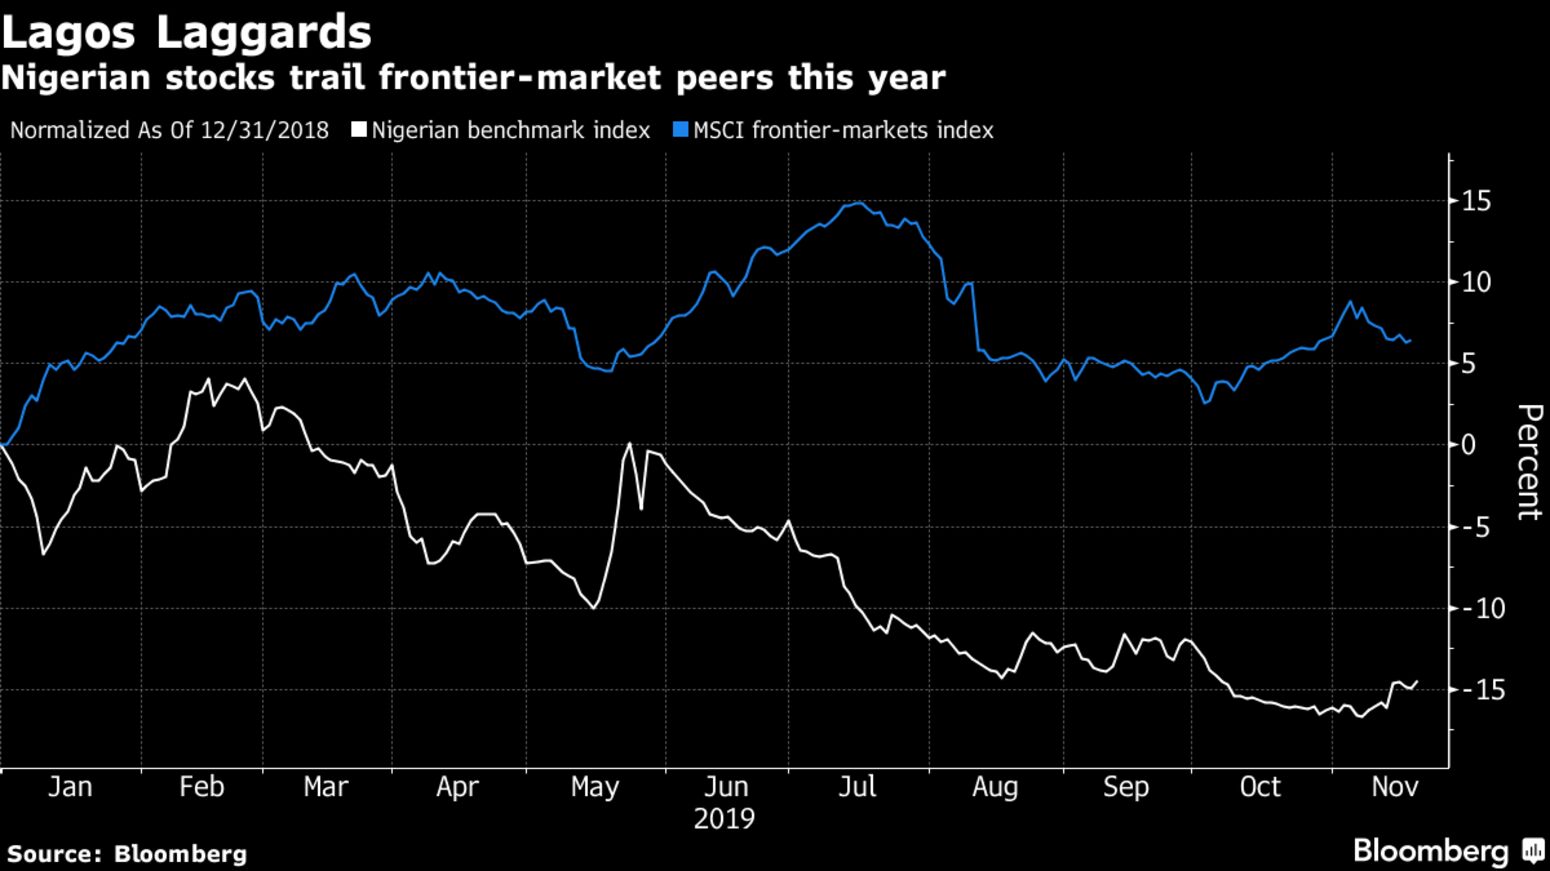 Nigerian stocks trail frontier-market peers this year